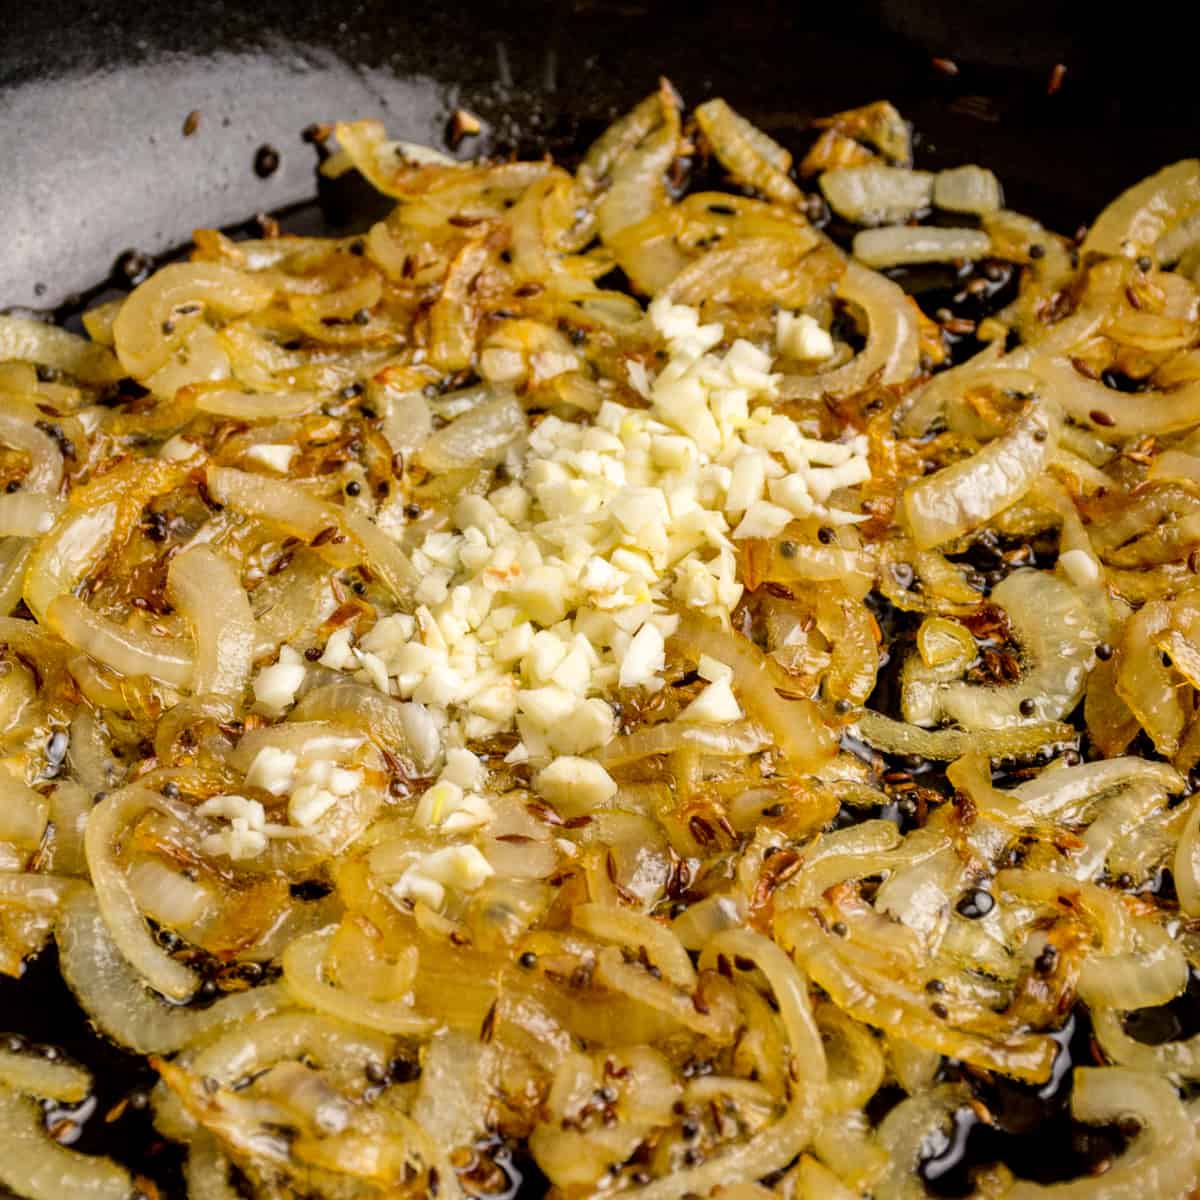 The onion is know golden brown as the chopped garlic is added.